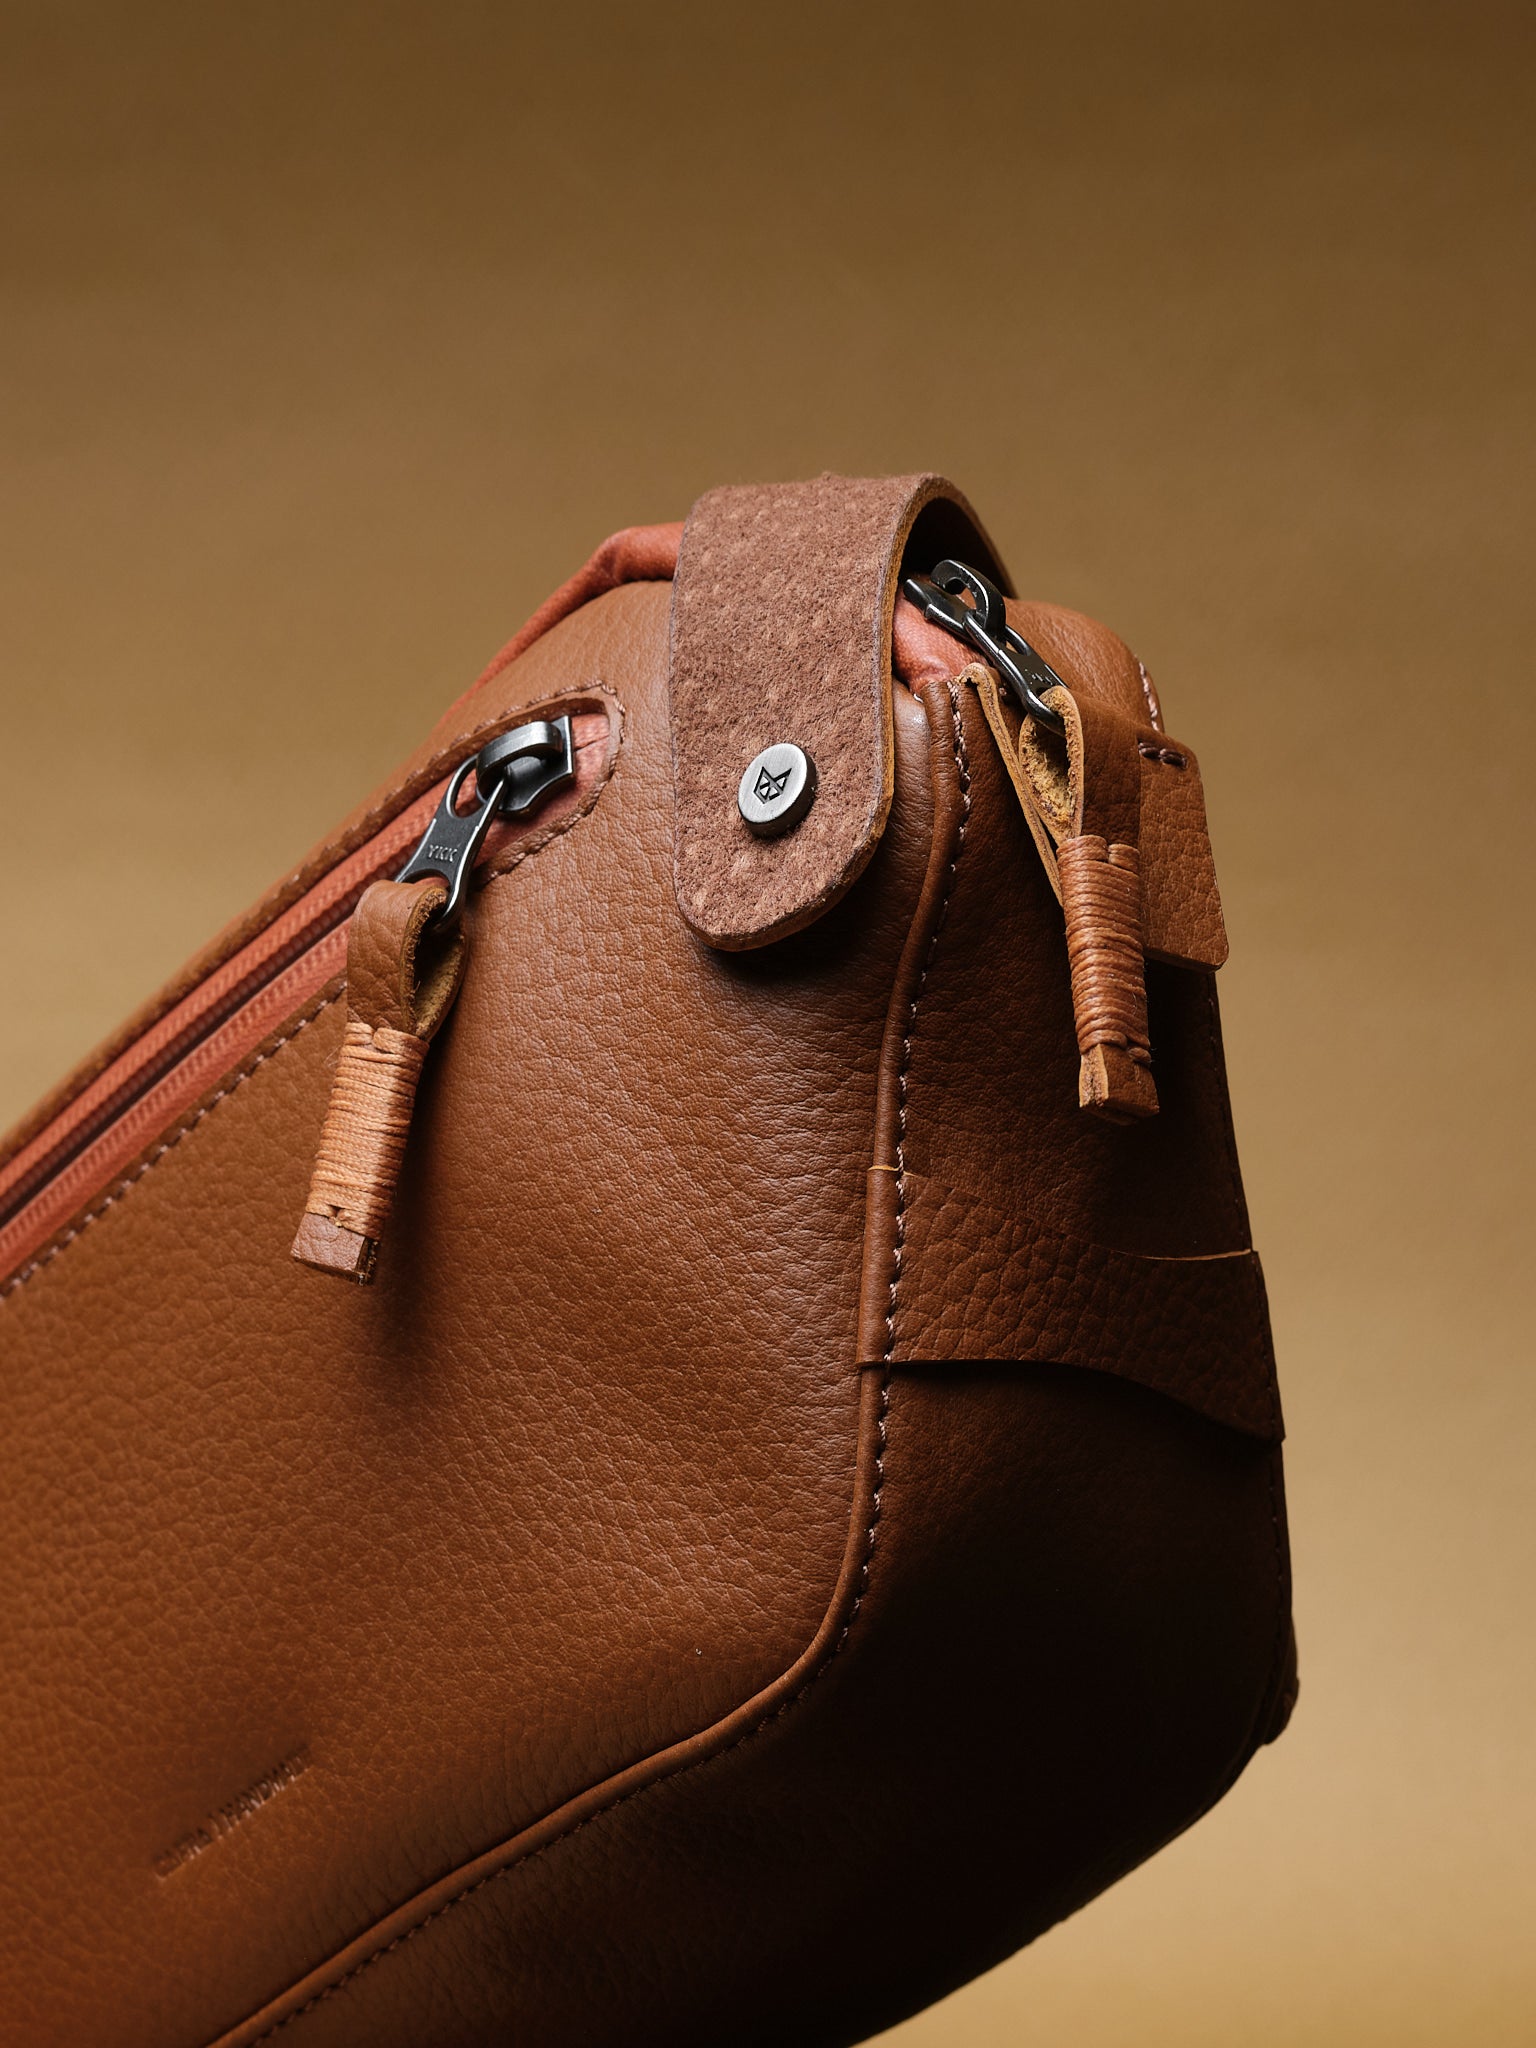 Hand-stitched details. Leather Sling Bag. Best Fanny Pack Tan by Capra